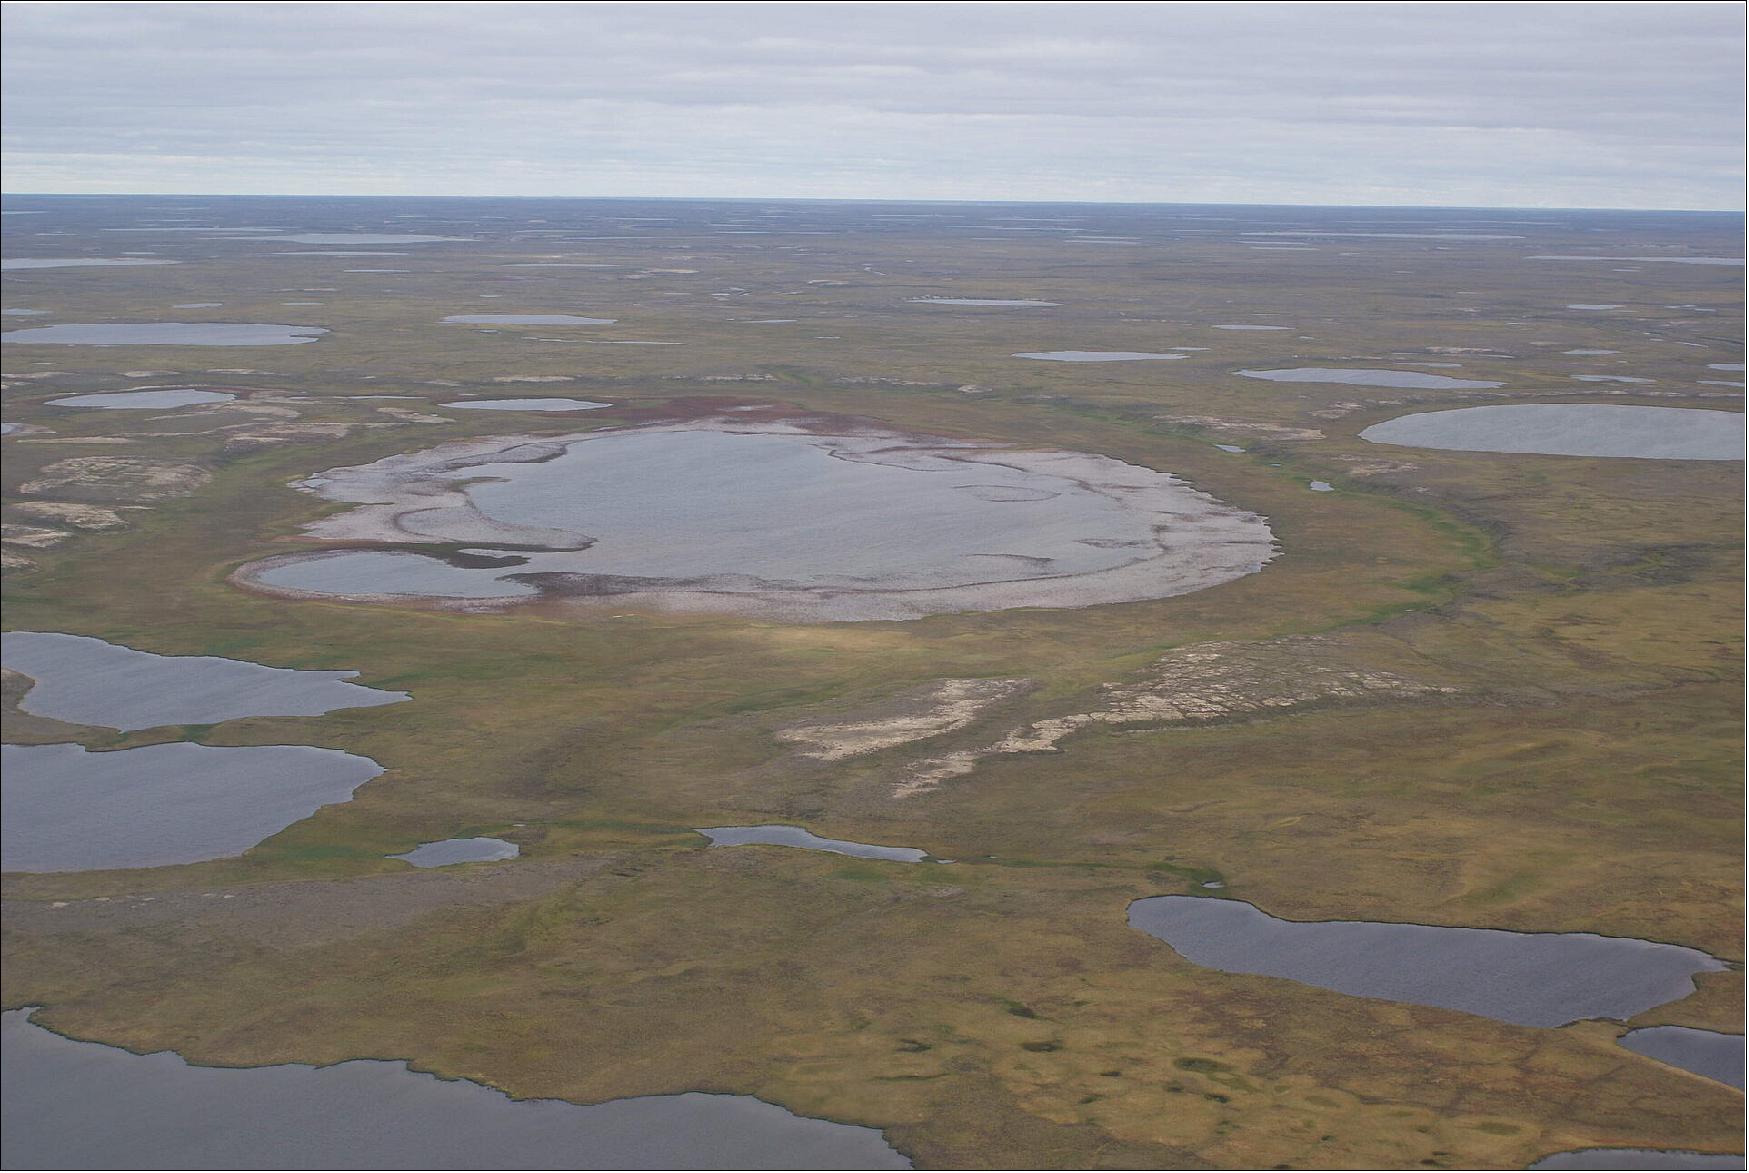 Figure 1: The image shows a partially drained lake on the Yamal Peninsula in northwest Siberia. The rapid thaw of permafrost, as a result of climate change, has huge impacts on the natural environment. Lakes such as this can drain suddenly when the underlying permafrost thaws (image credit: ESA, A. Bartsch)